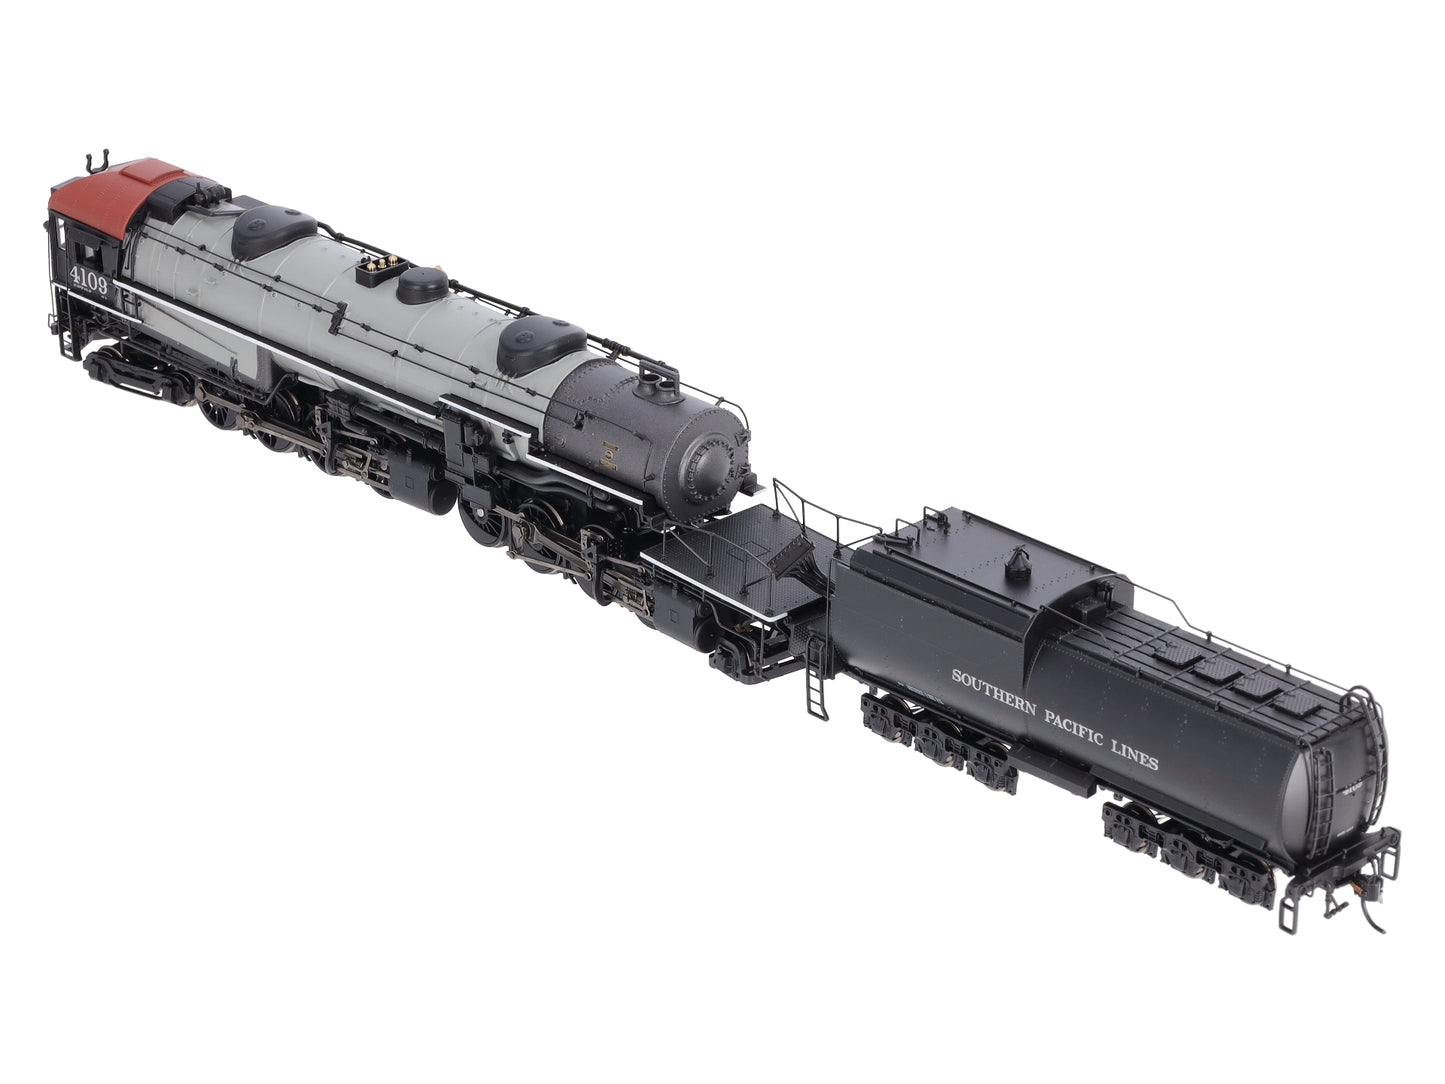 Broadway Limited 6264 HO Southern Pacific Cab Foward 4-8-8-2 AC4 w/ Sound #4109